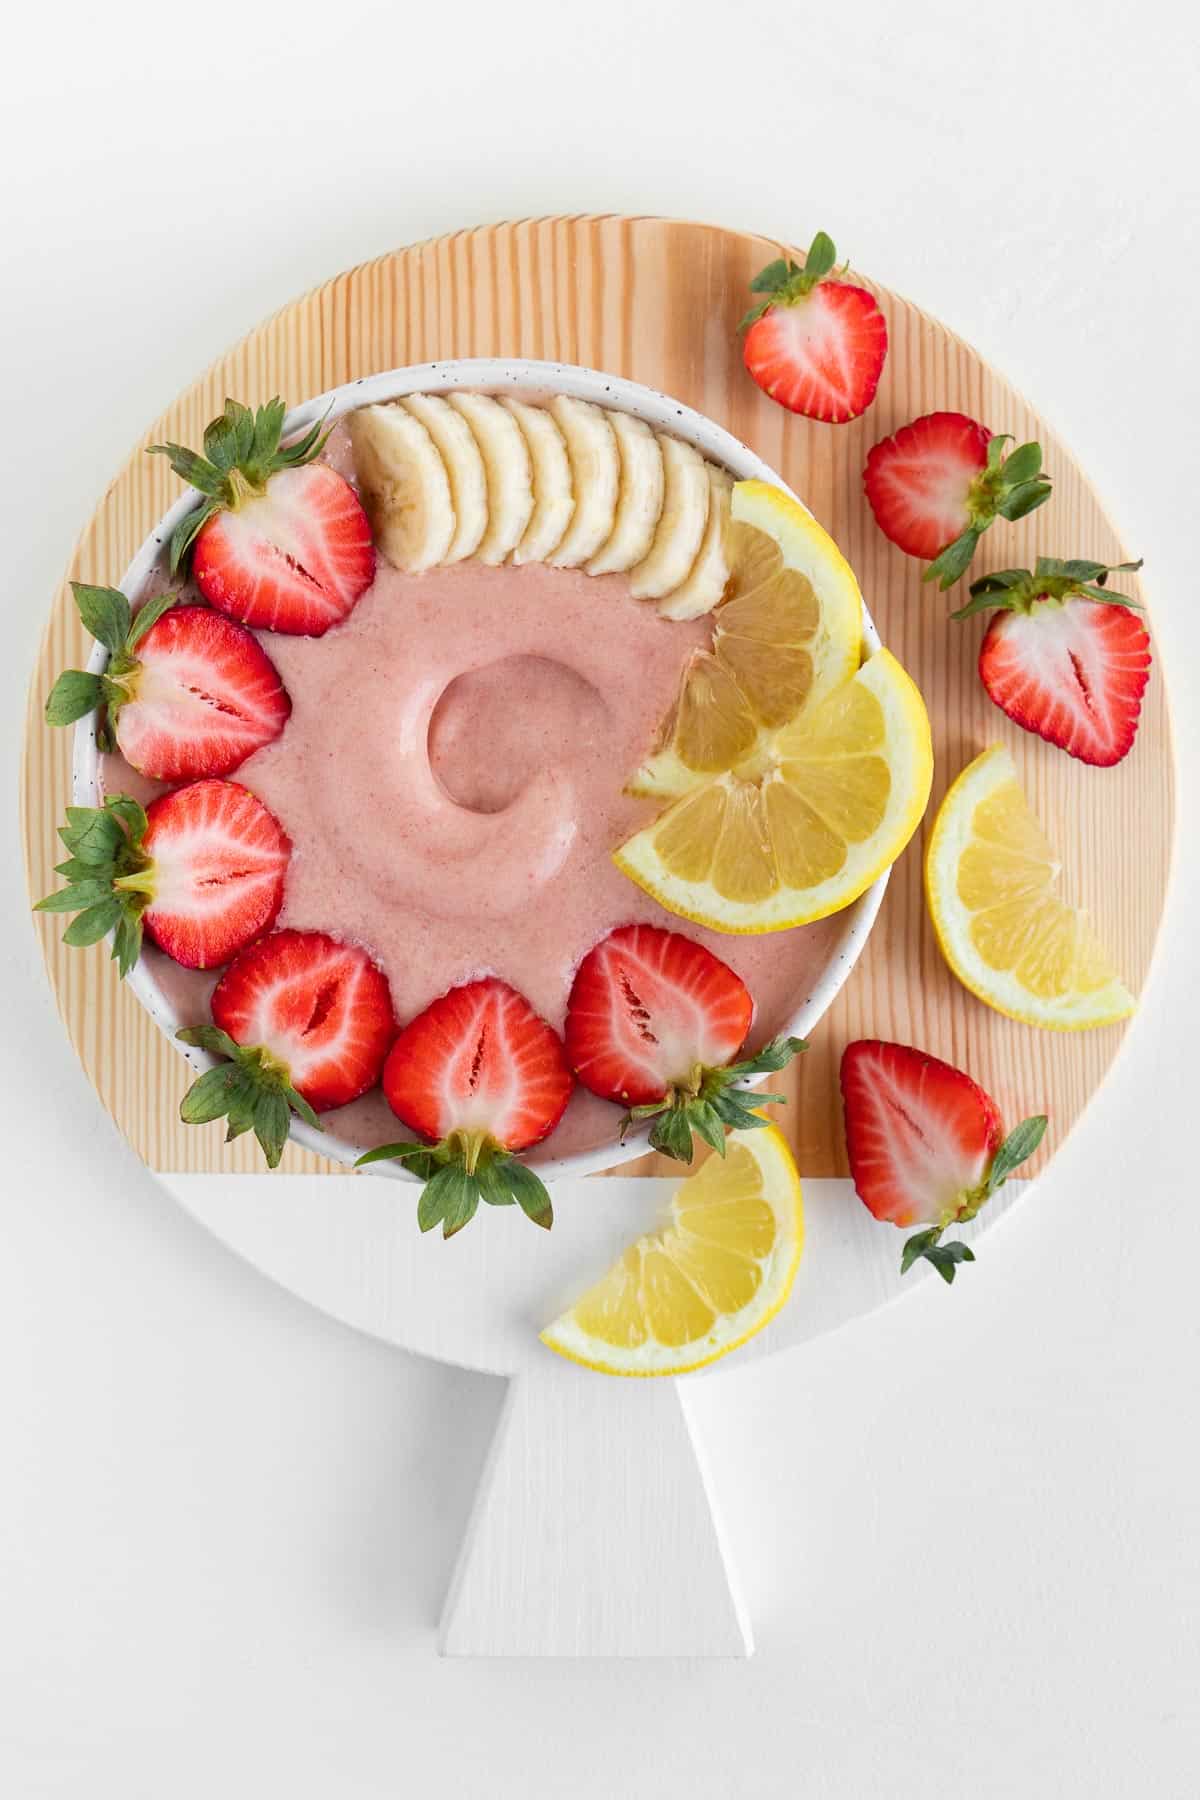 a round wooden cutting board topped with a strawberry lemonade smoothie bowl, sliced berries, and sliced lemons